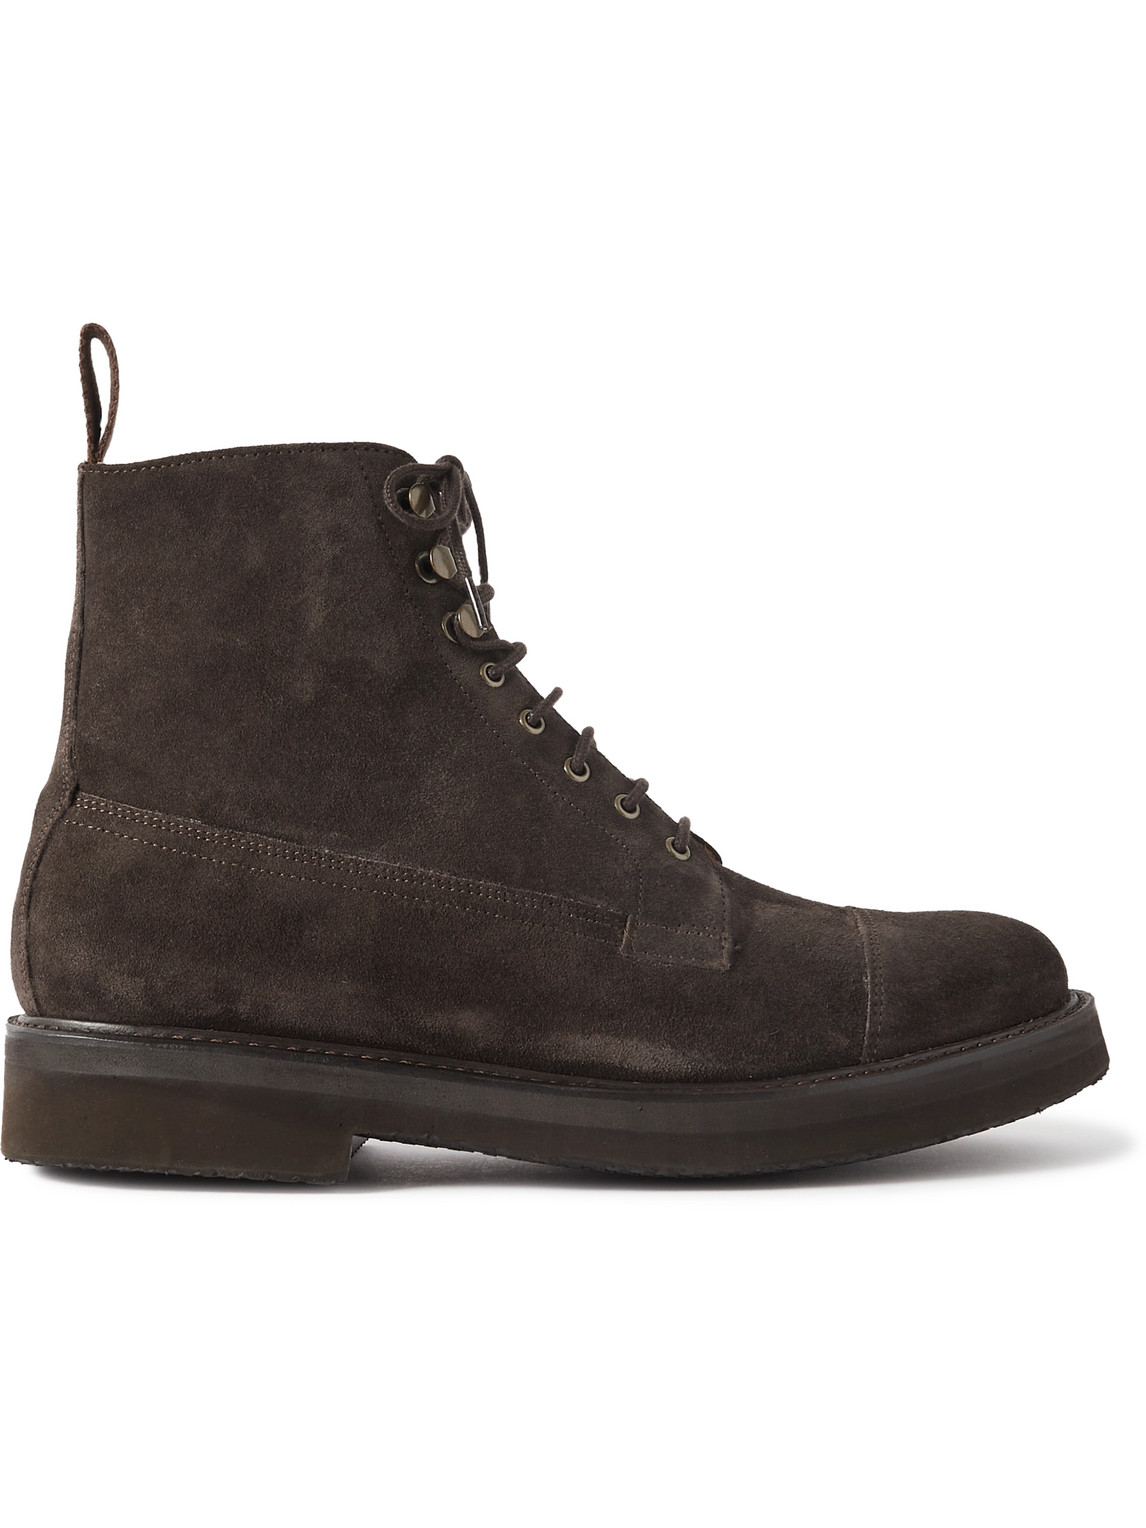 Harry Suede Lace-Up Boots